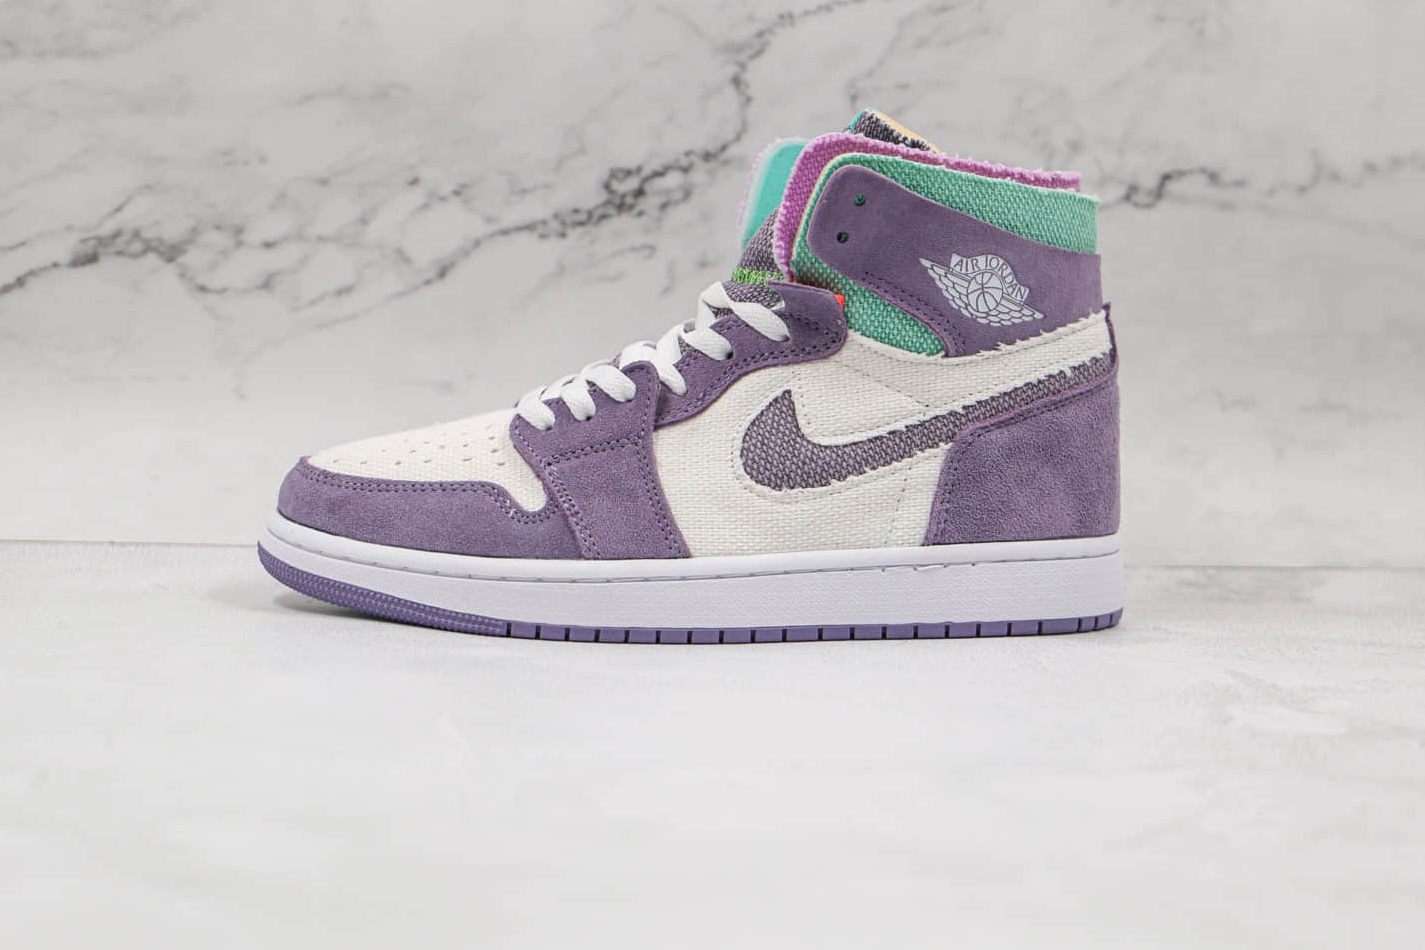 Air Jordan 1 High Zoom Comfort 'Tropical Twist' CT0978-150 - Stylish Comfort for Sneaker Enthusiasts